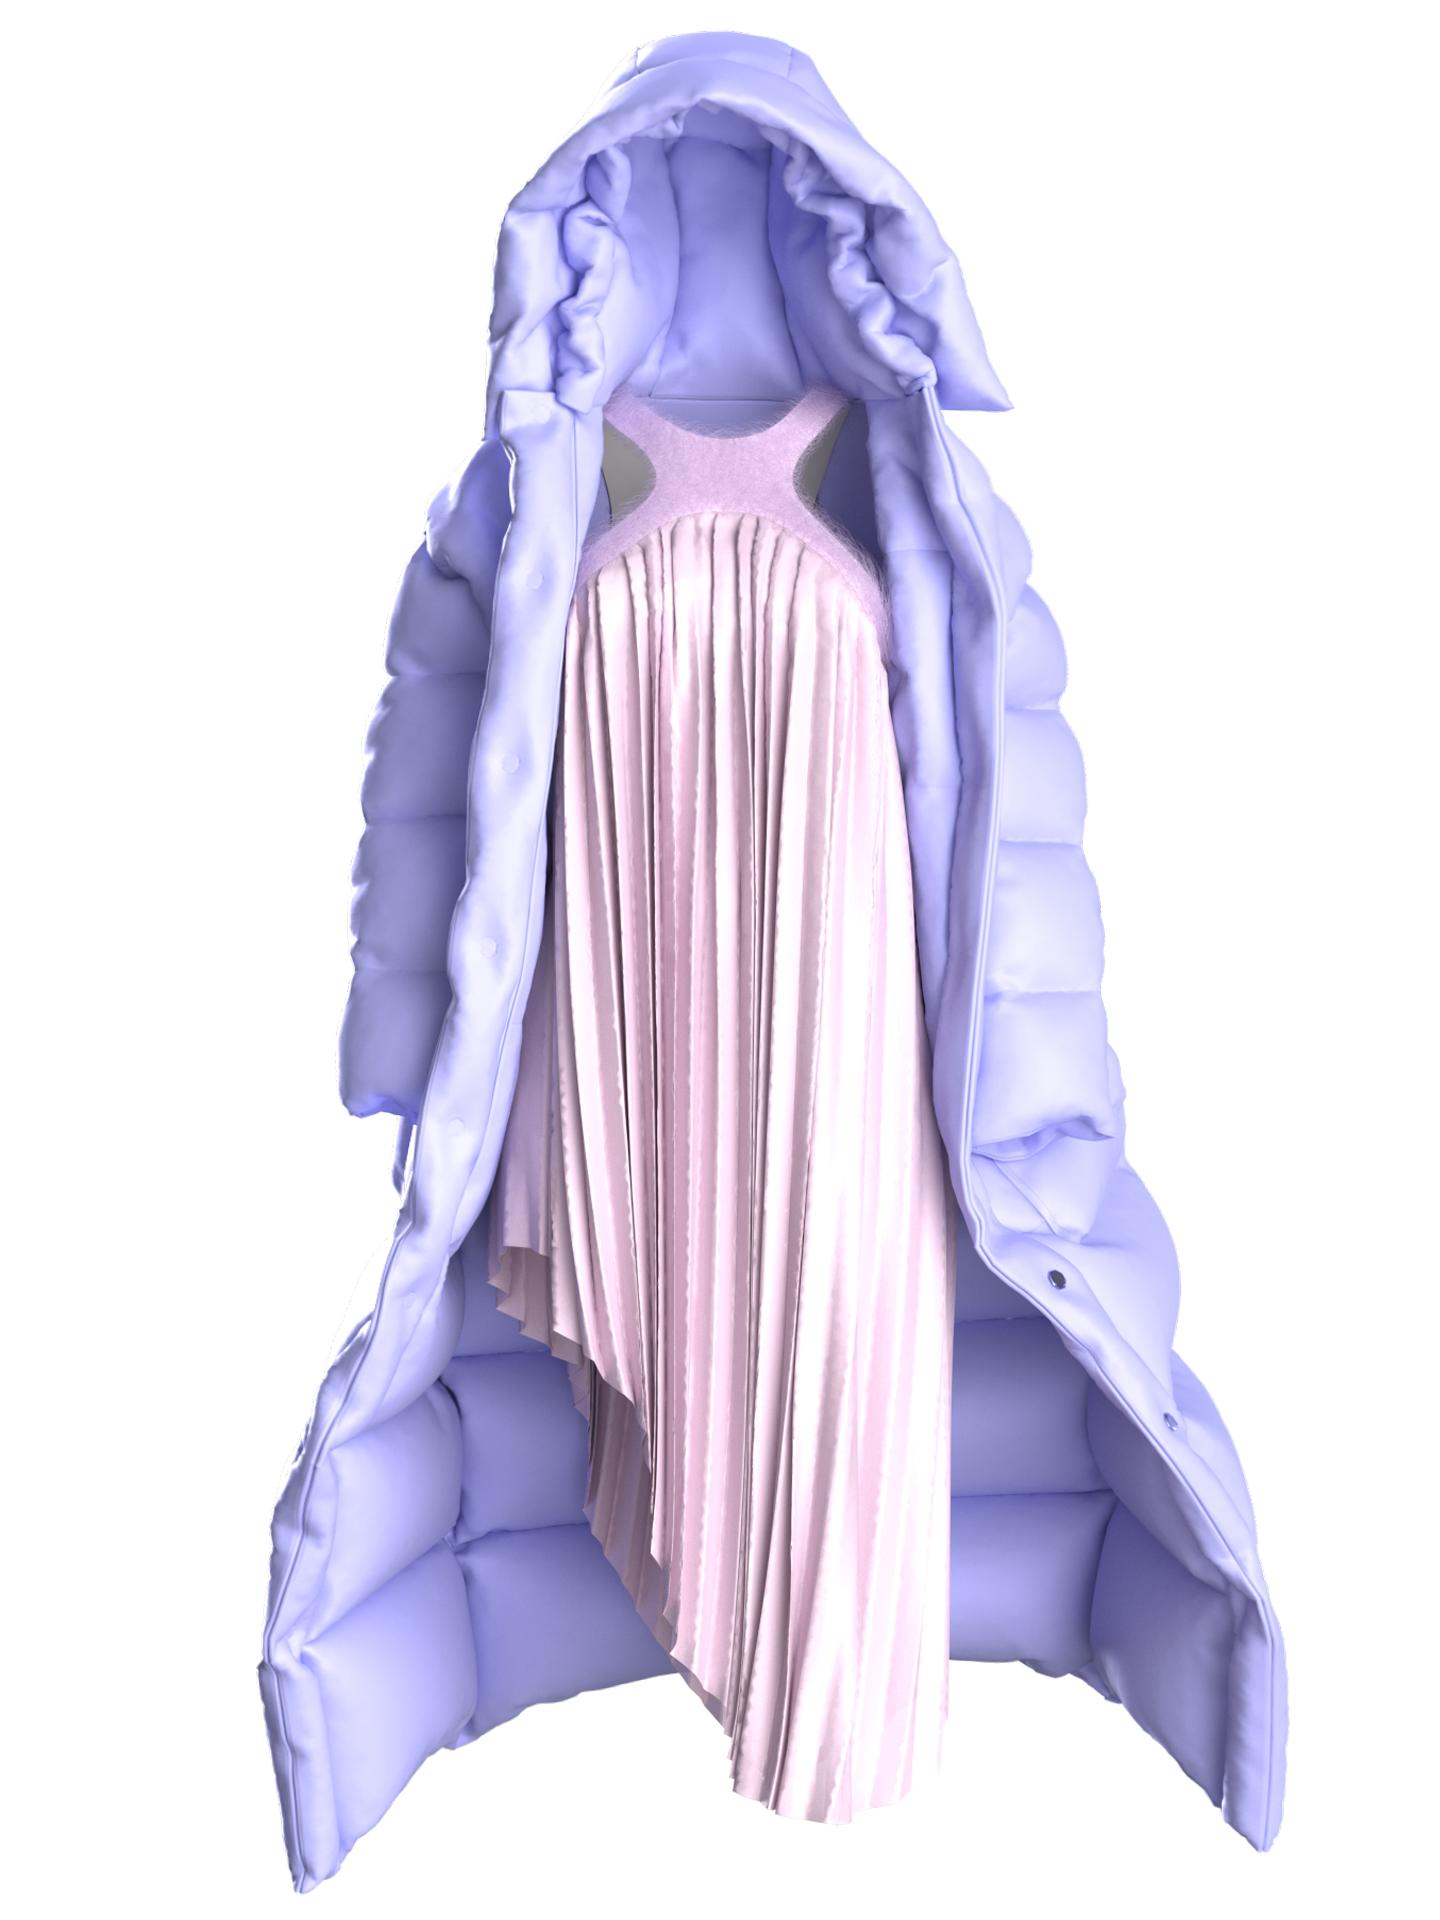 Fantasy Realm Dress + Puffer Coat Set by METANEON